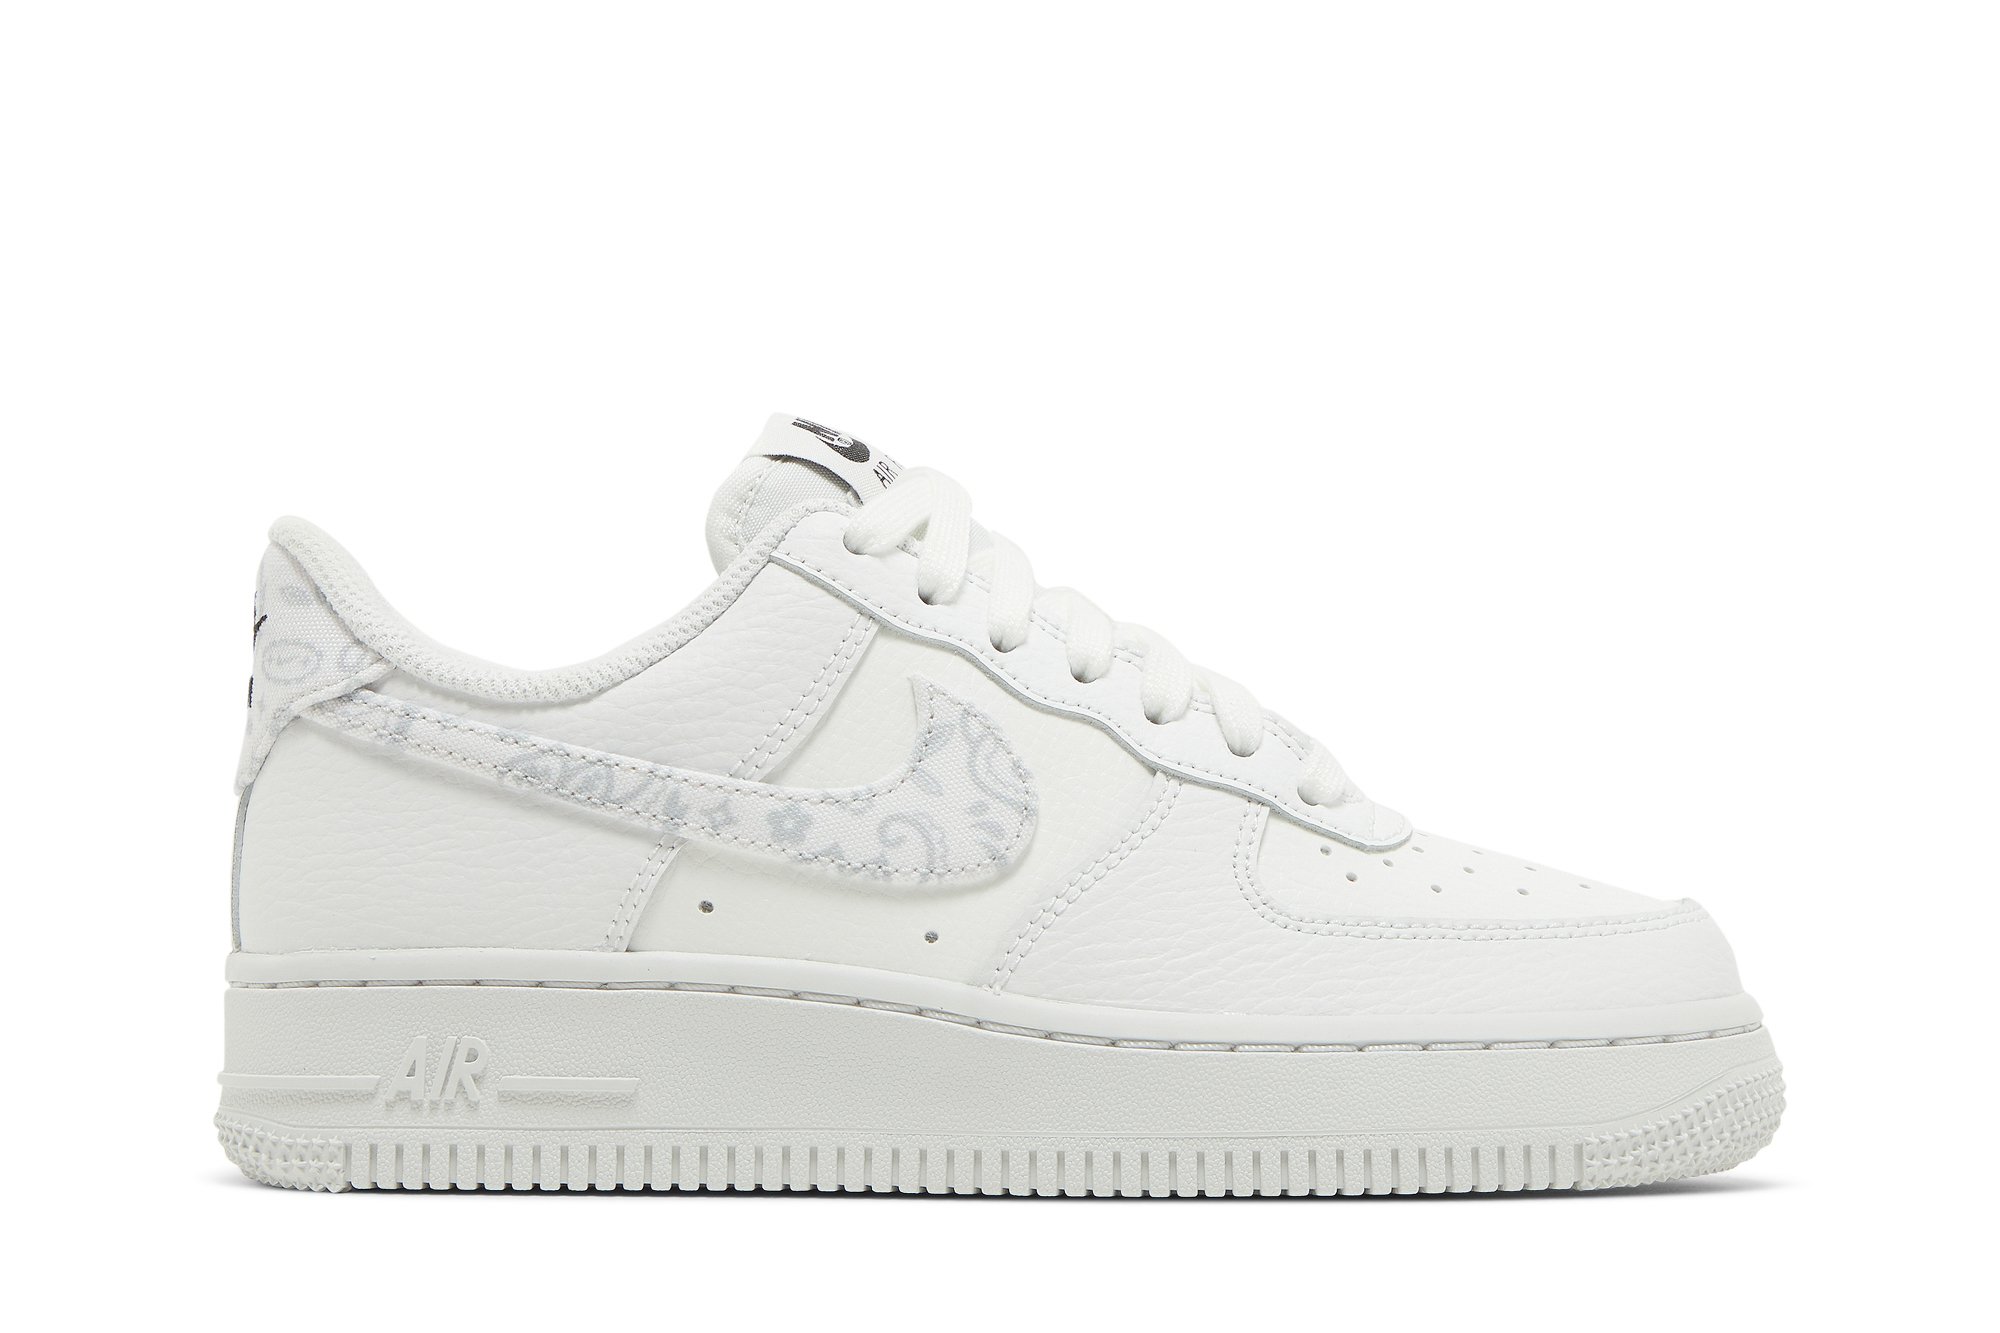 Buy Wmns Air Force 1 Low 'White Paisley' - DJ9942 100 | GOAT